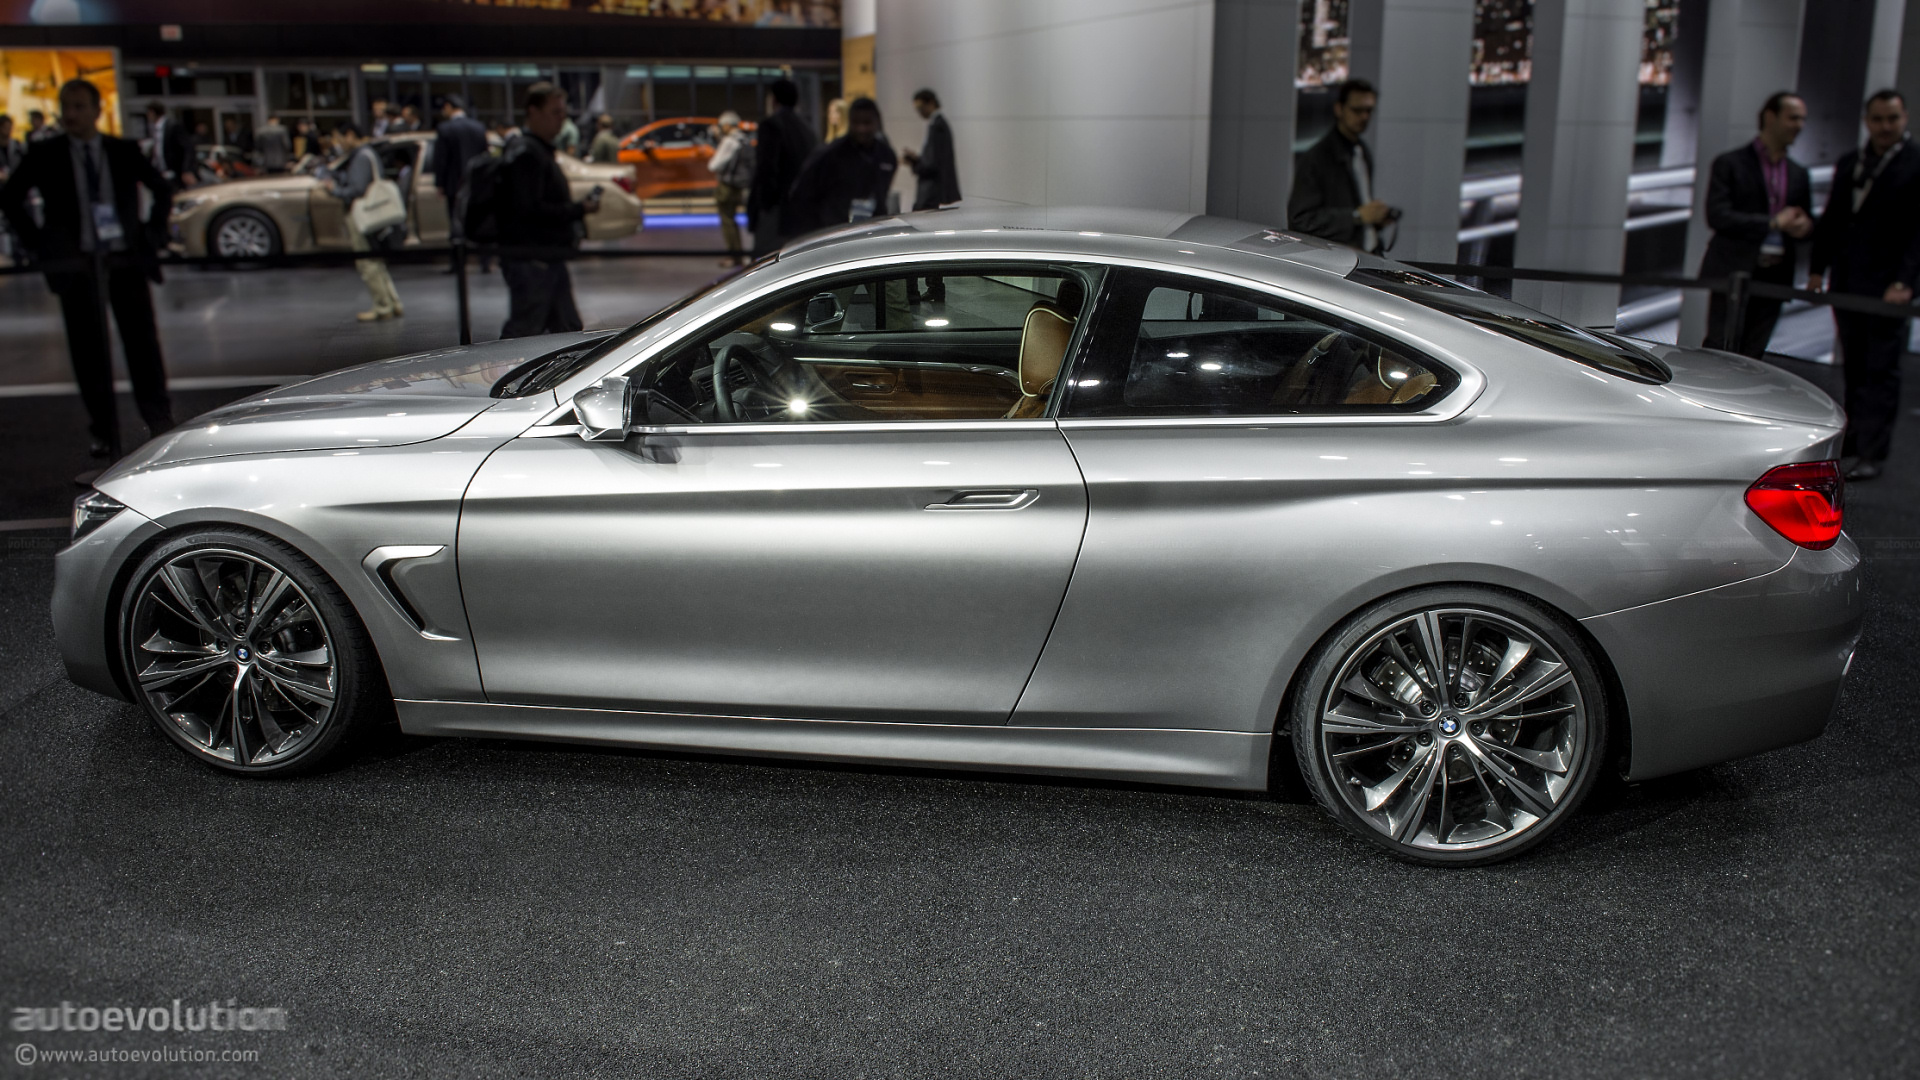 A New Level Of Luxury: The 2013 BMW 4 Series Coupe Concept